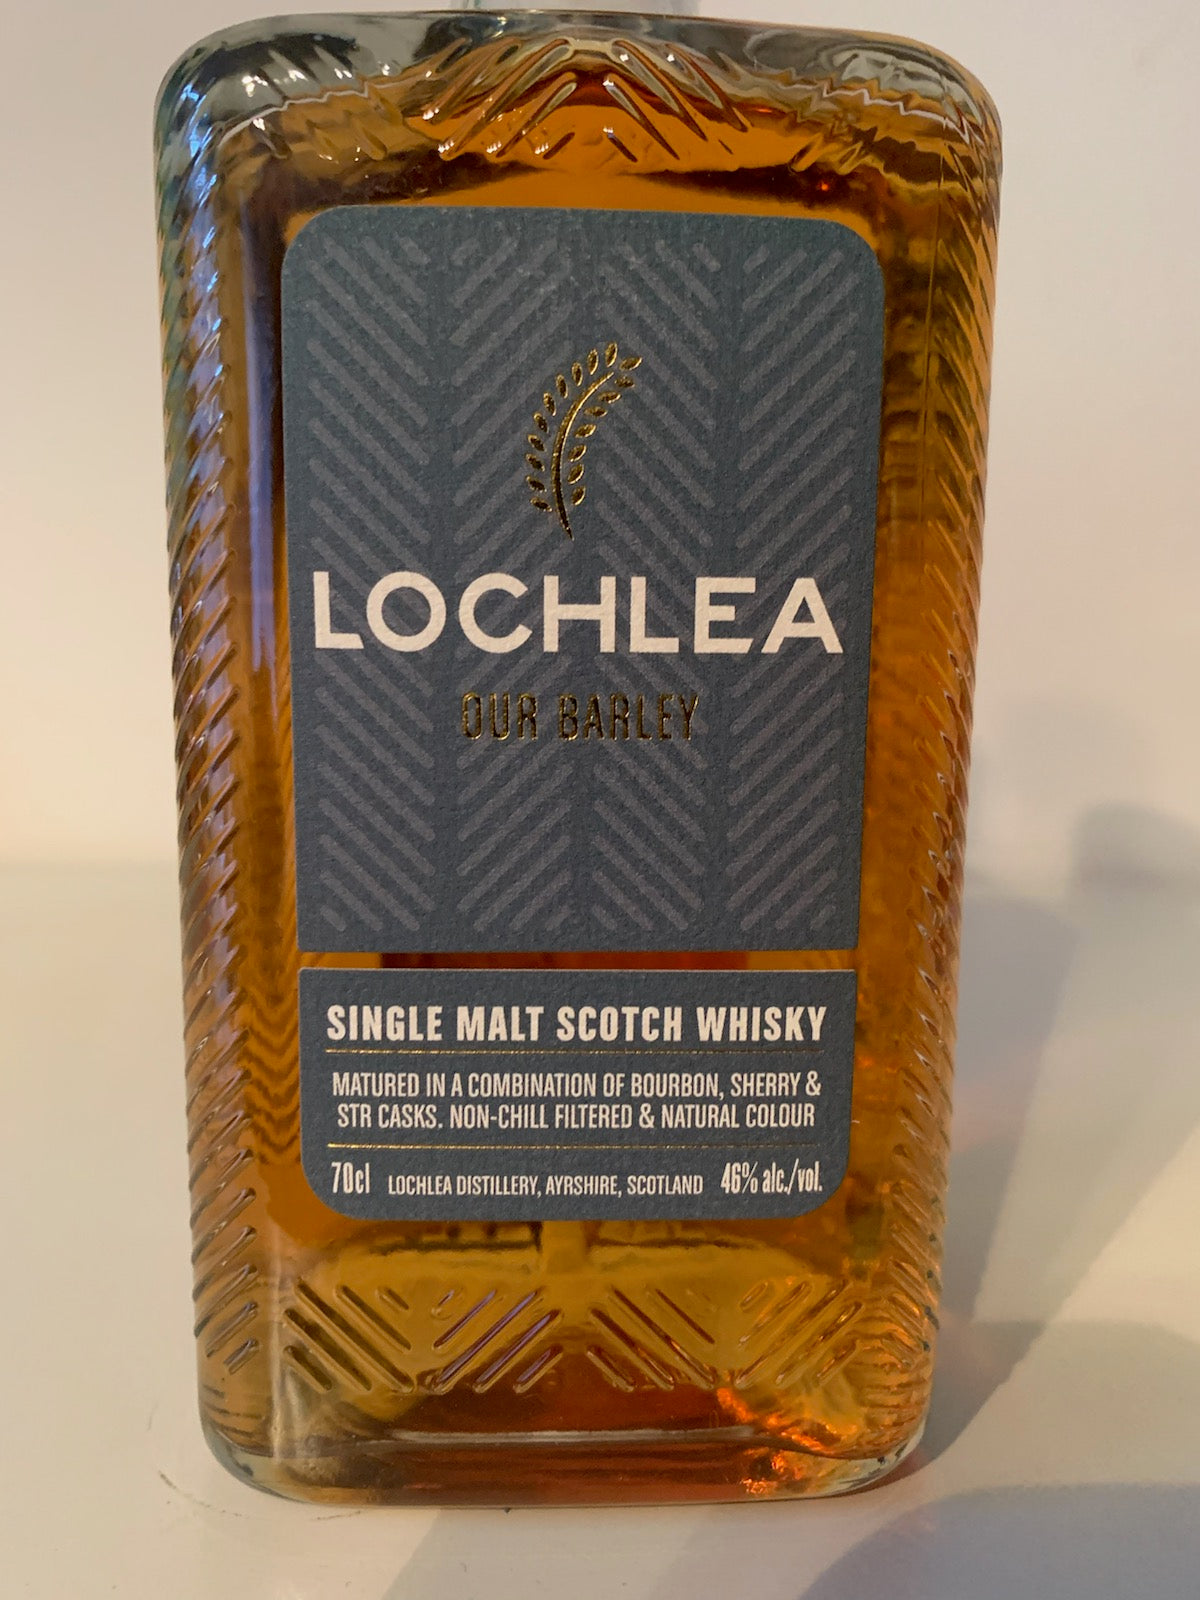 Lochlea “Our Barley” whisky 46% / 70 CL.